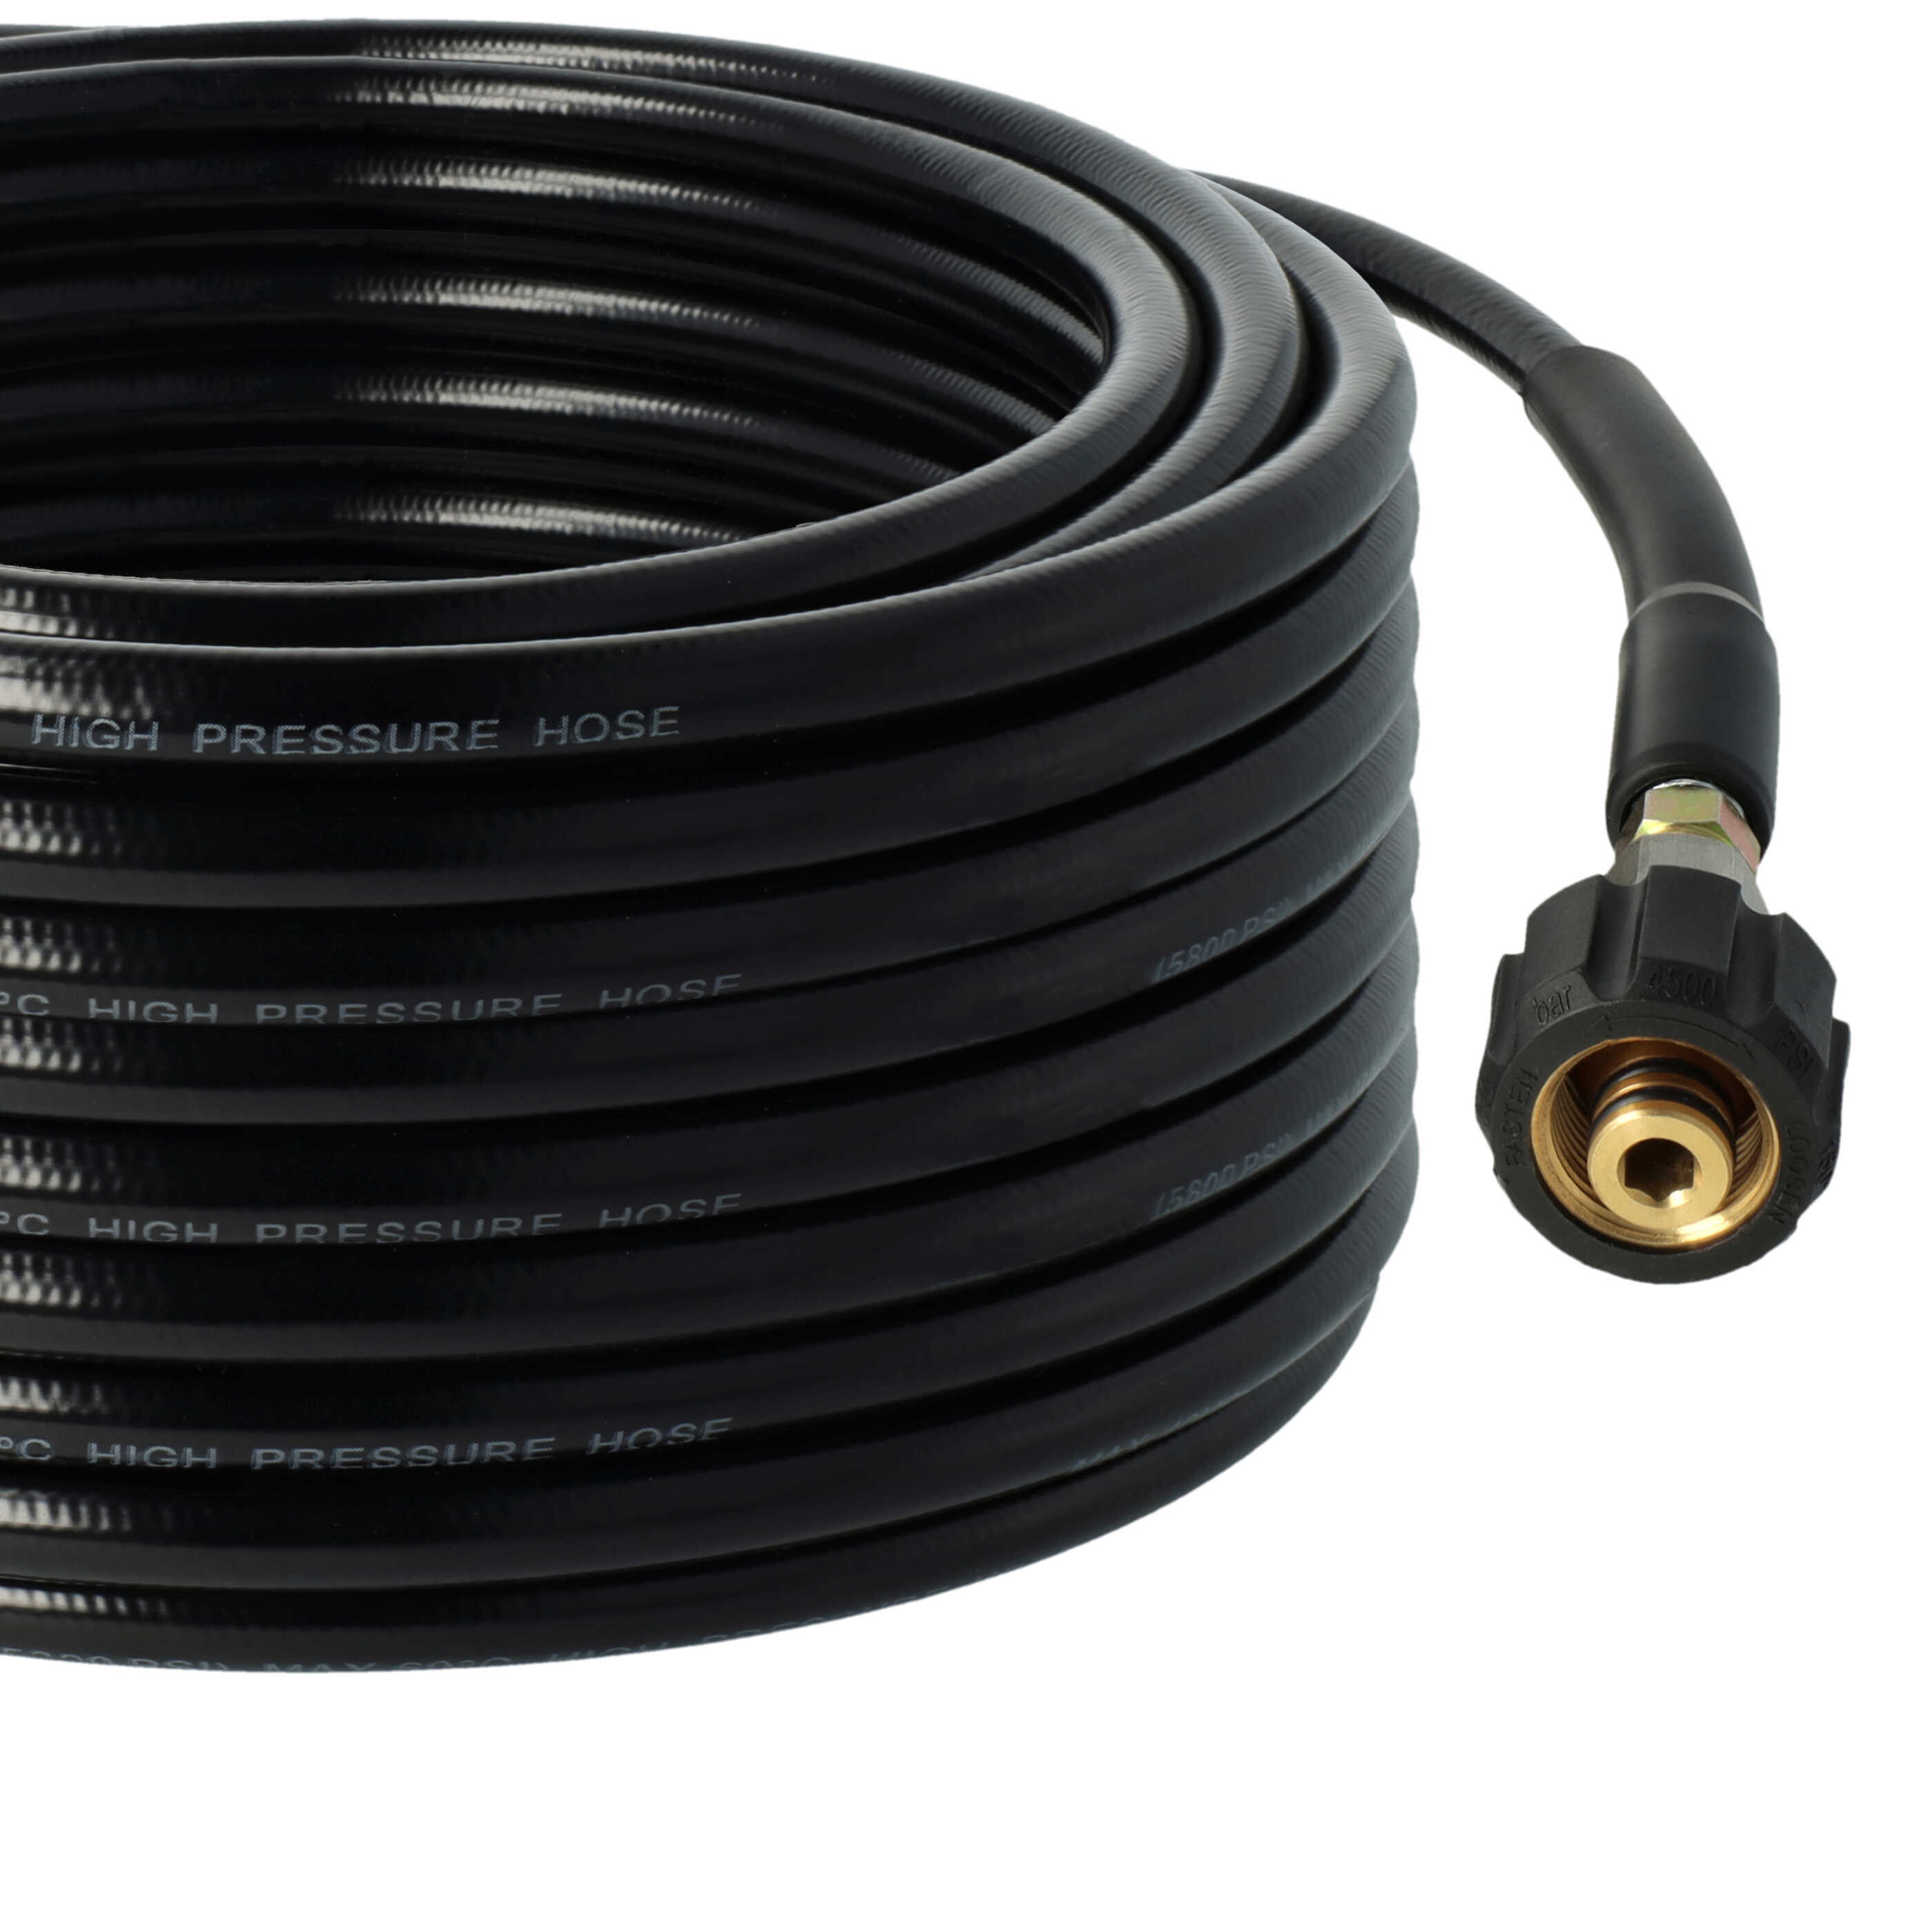 vhbw 30 m Extension Hose High-Pressure Cleaner with M22 x 1.5 Threaded Connection Black